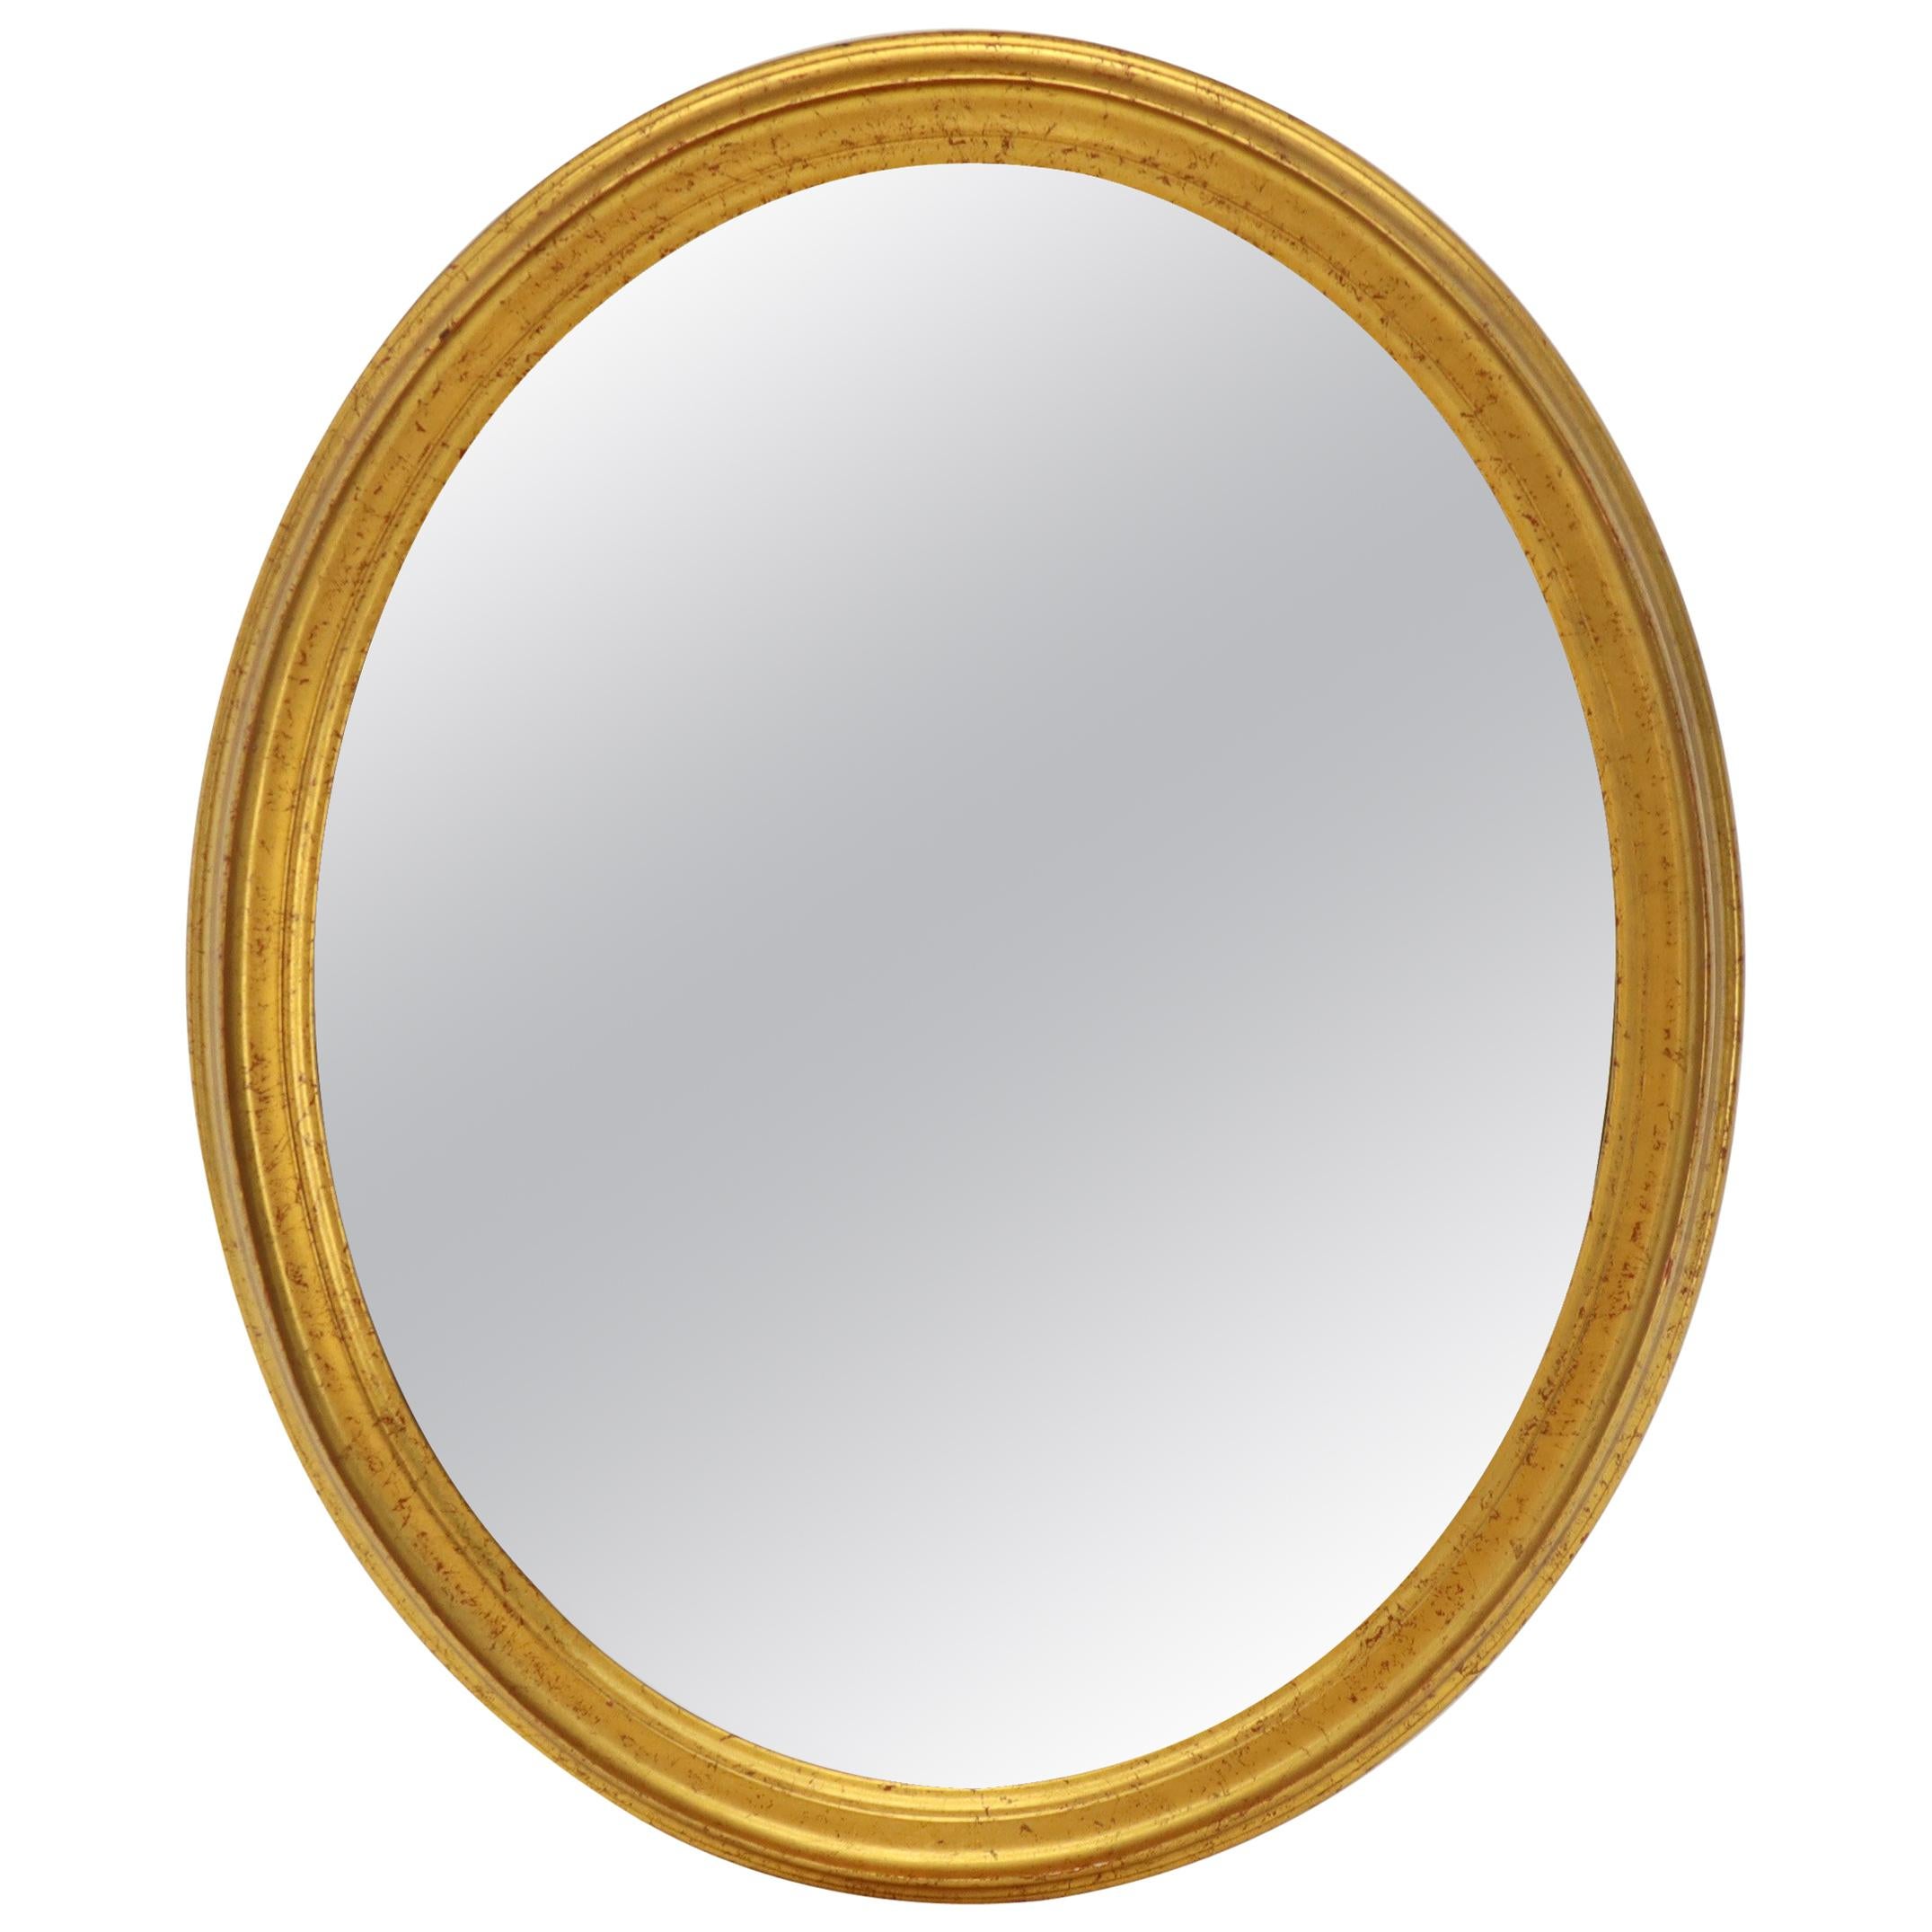 La Barge Oval Gold Frame Wall Mirror